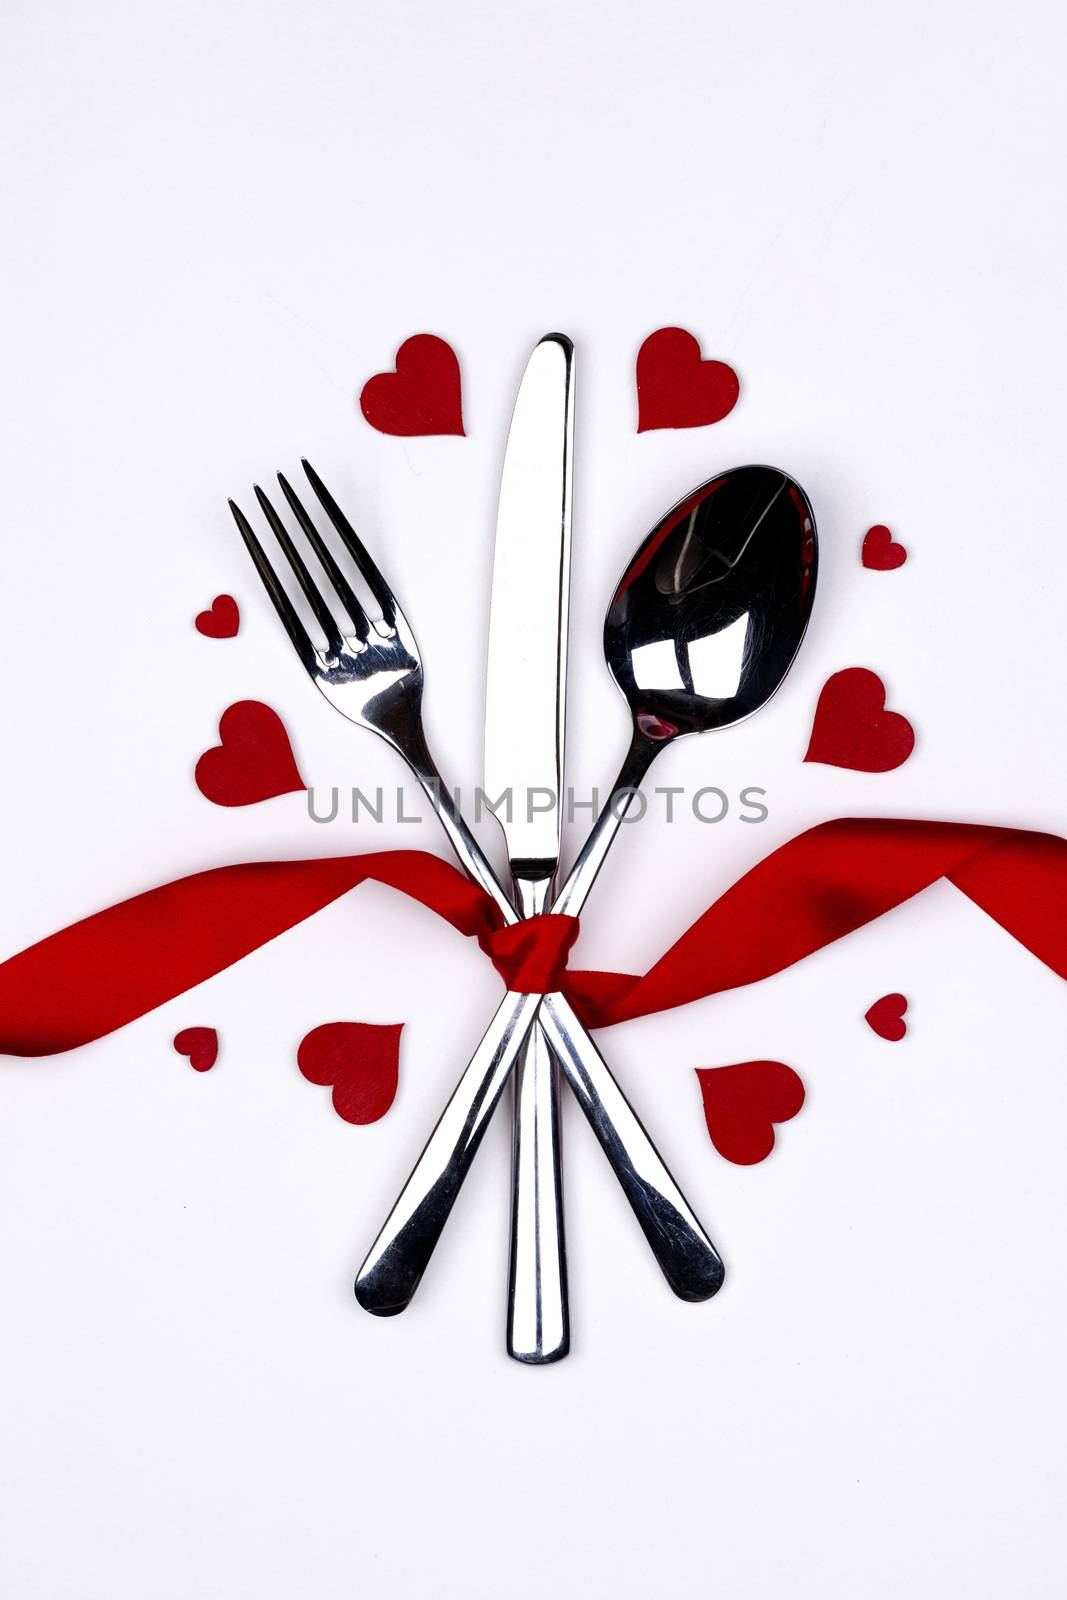 Cutlery set tied with silk ribbon and hearts on white background Valentine day dinner concept